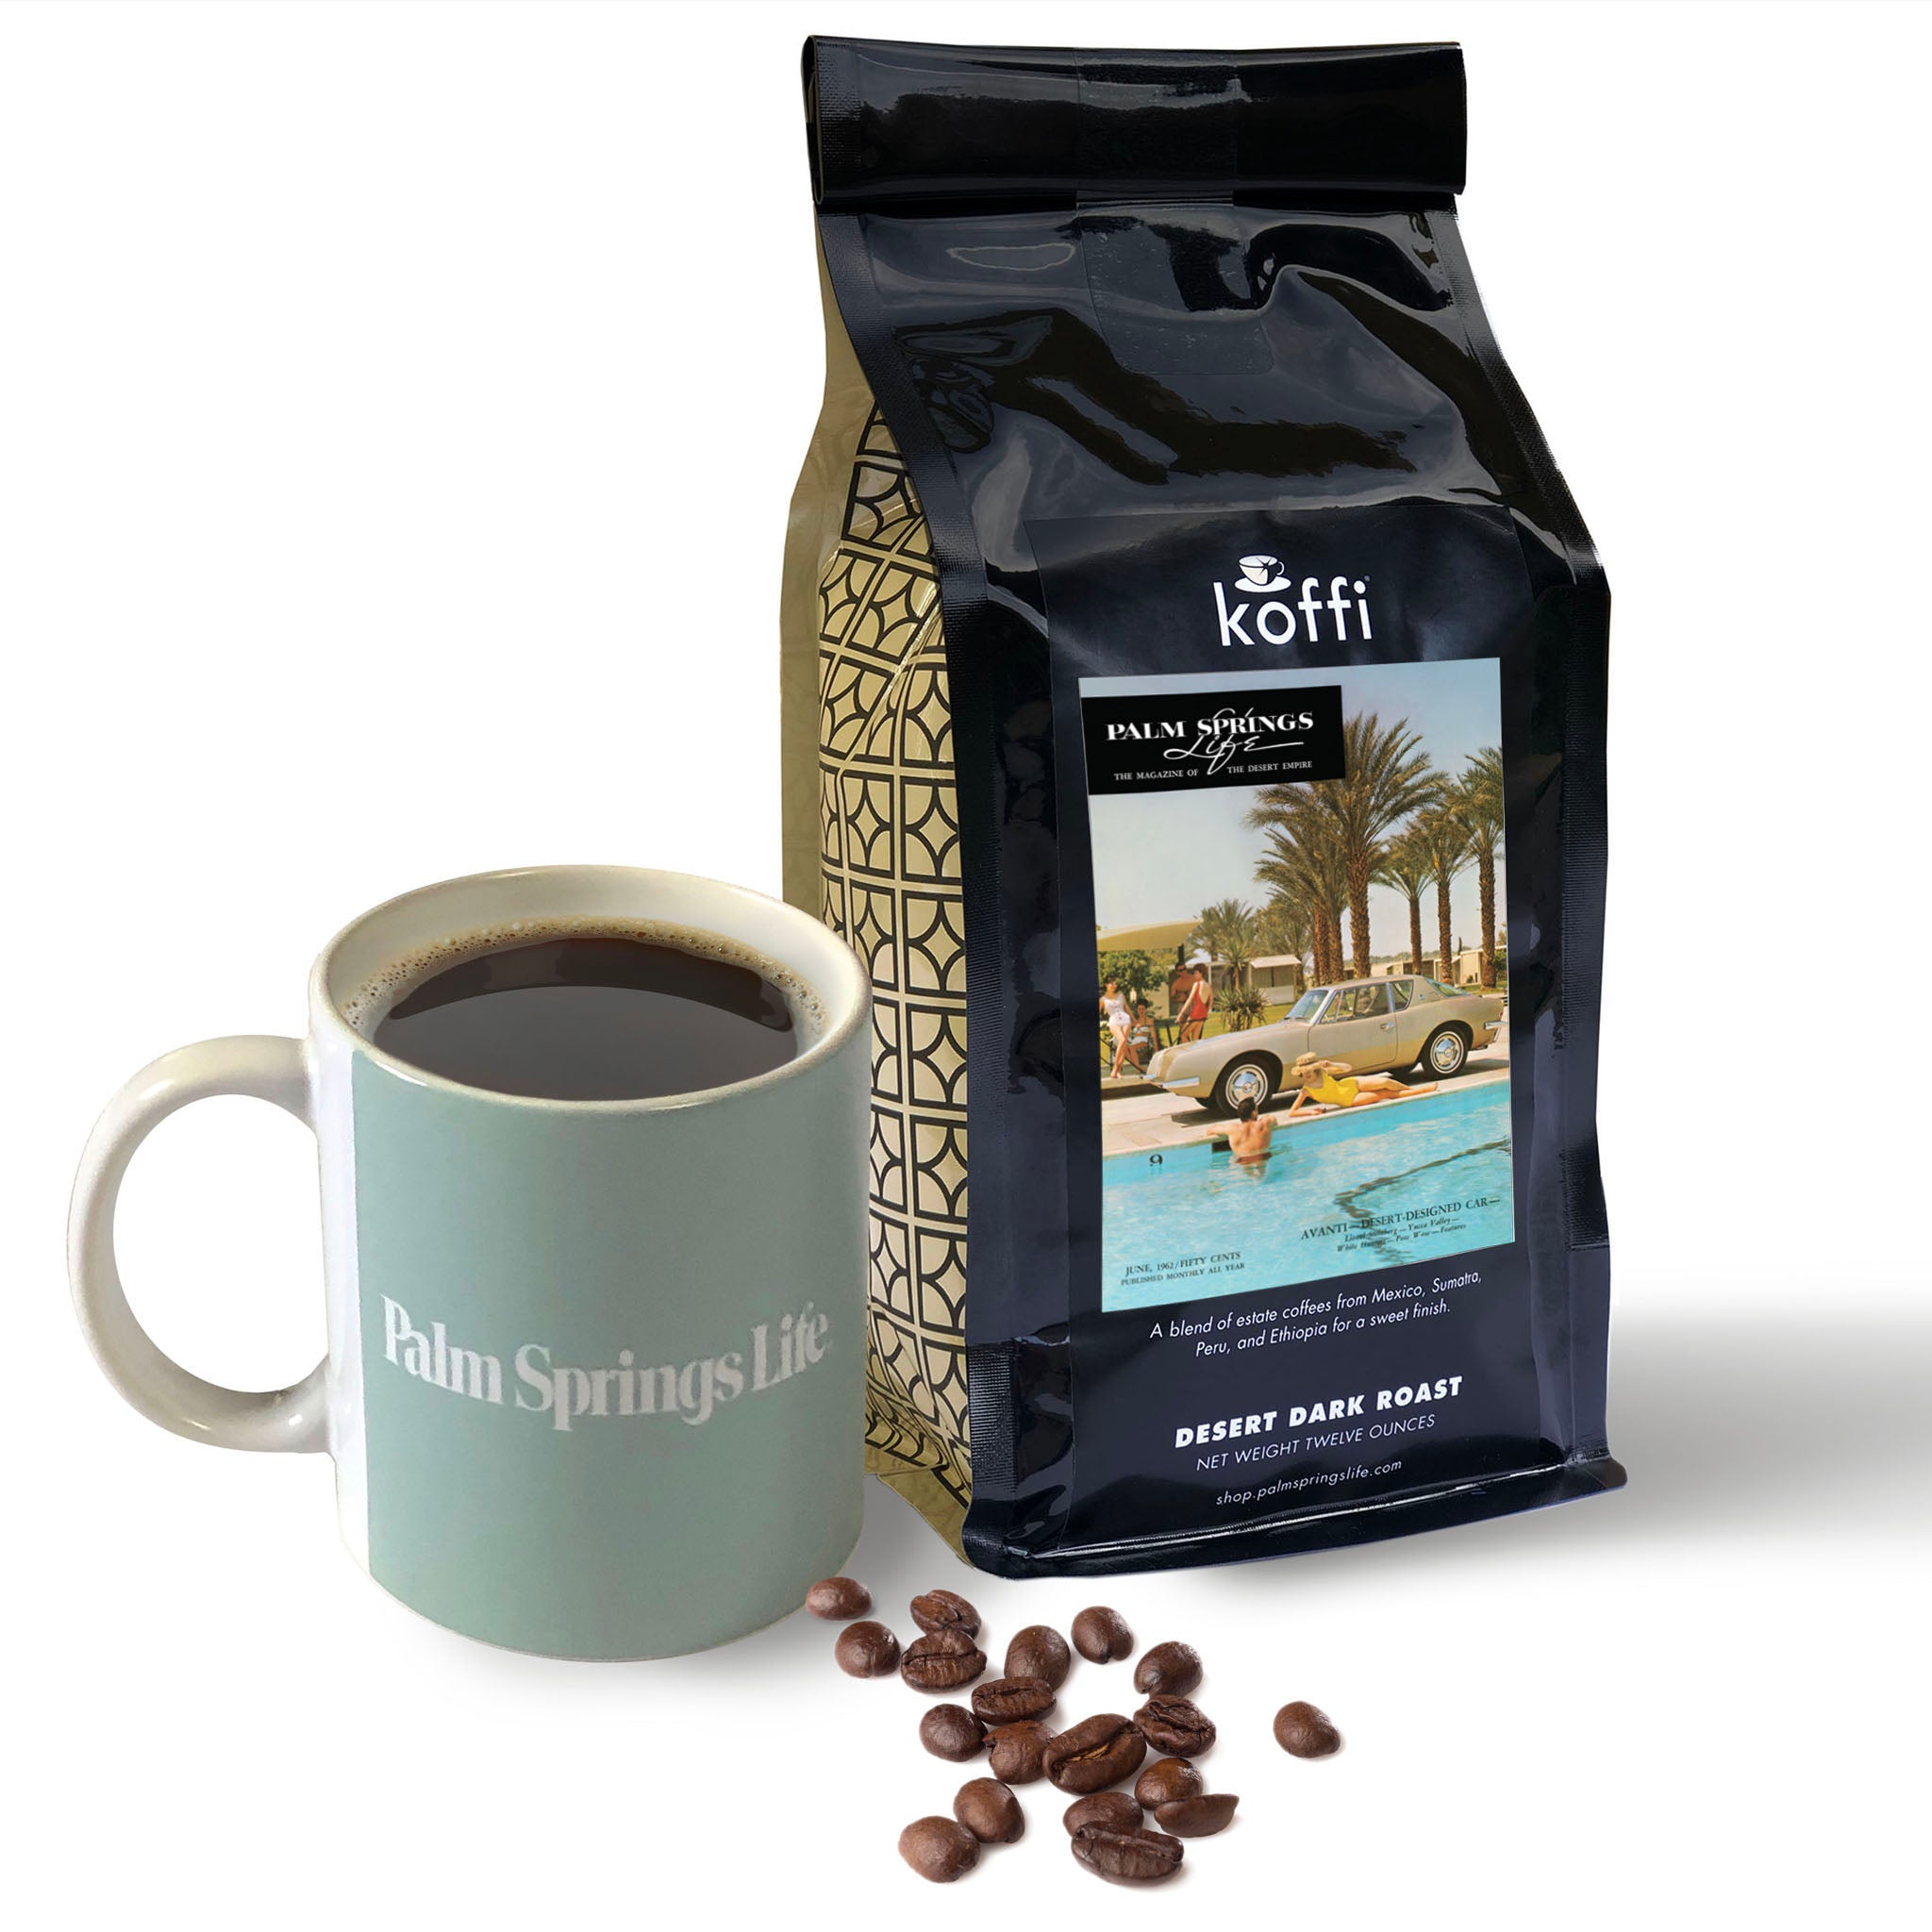 Coffee from Koffi and Palm Springs Life